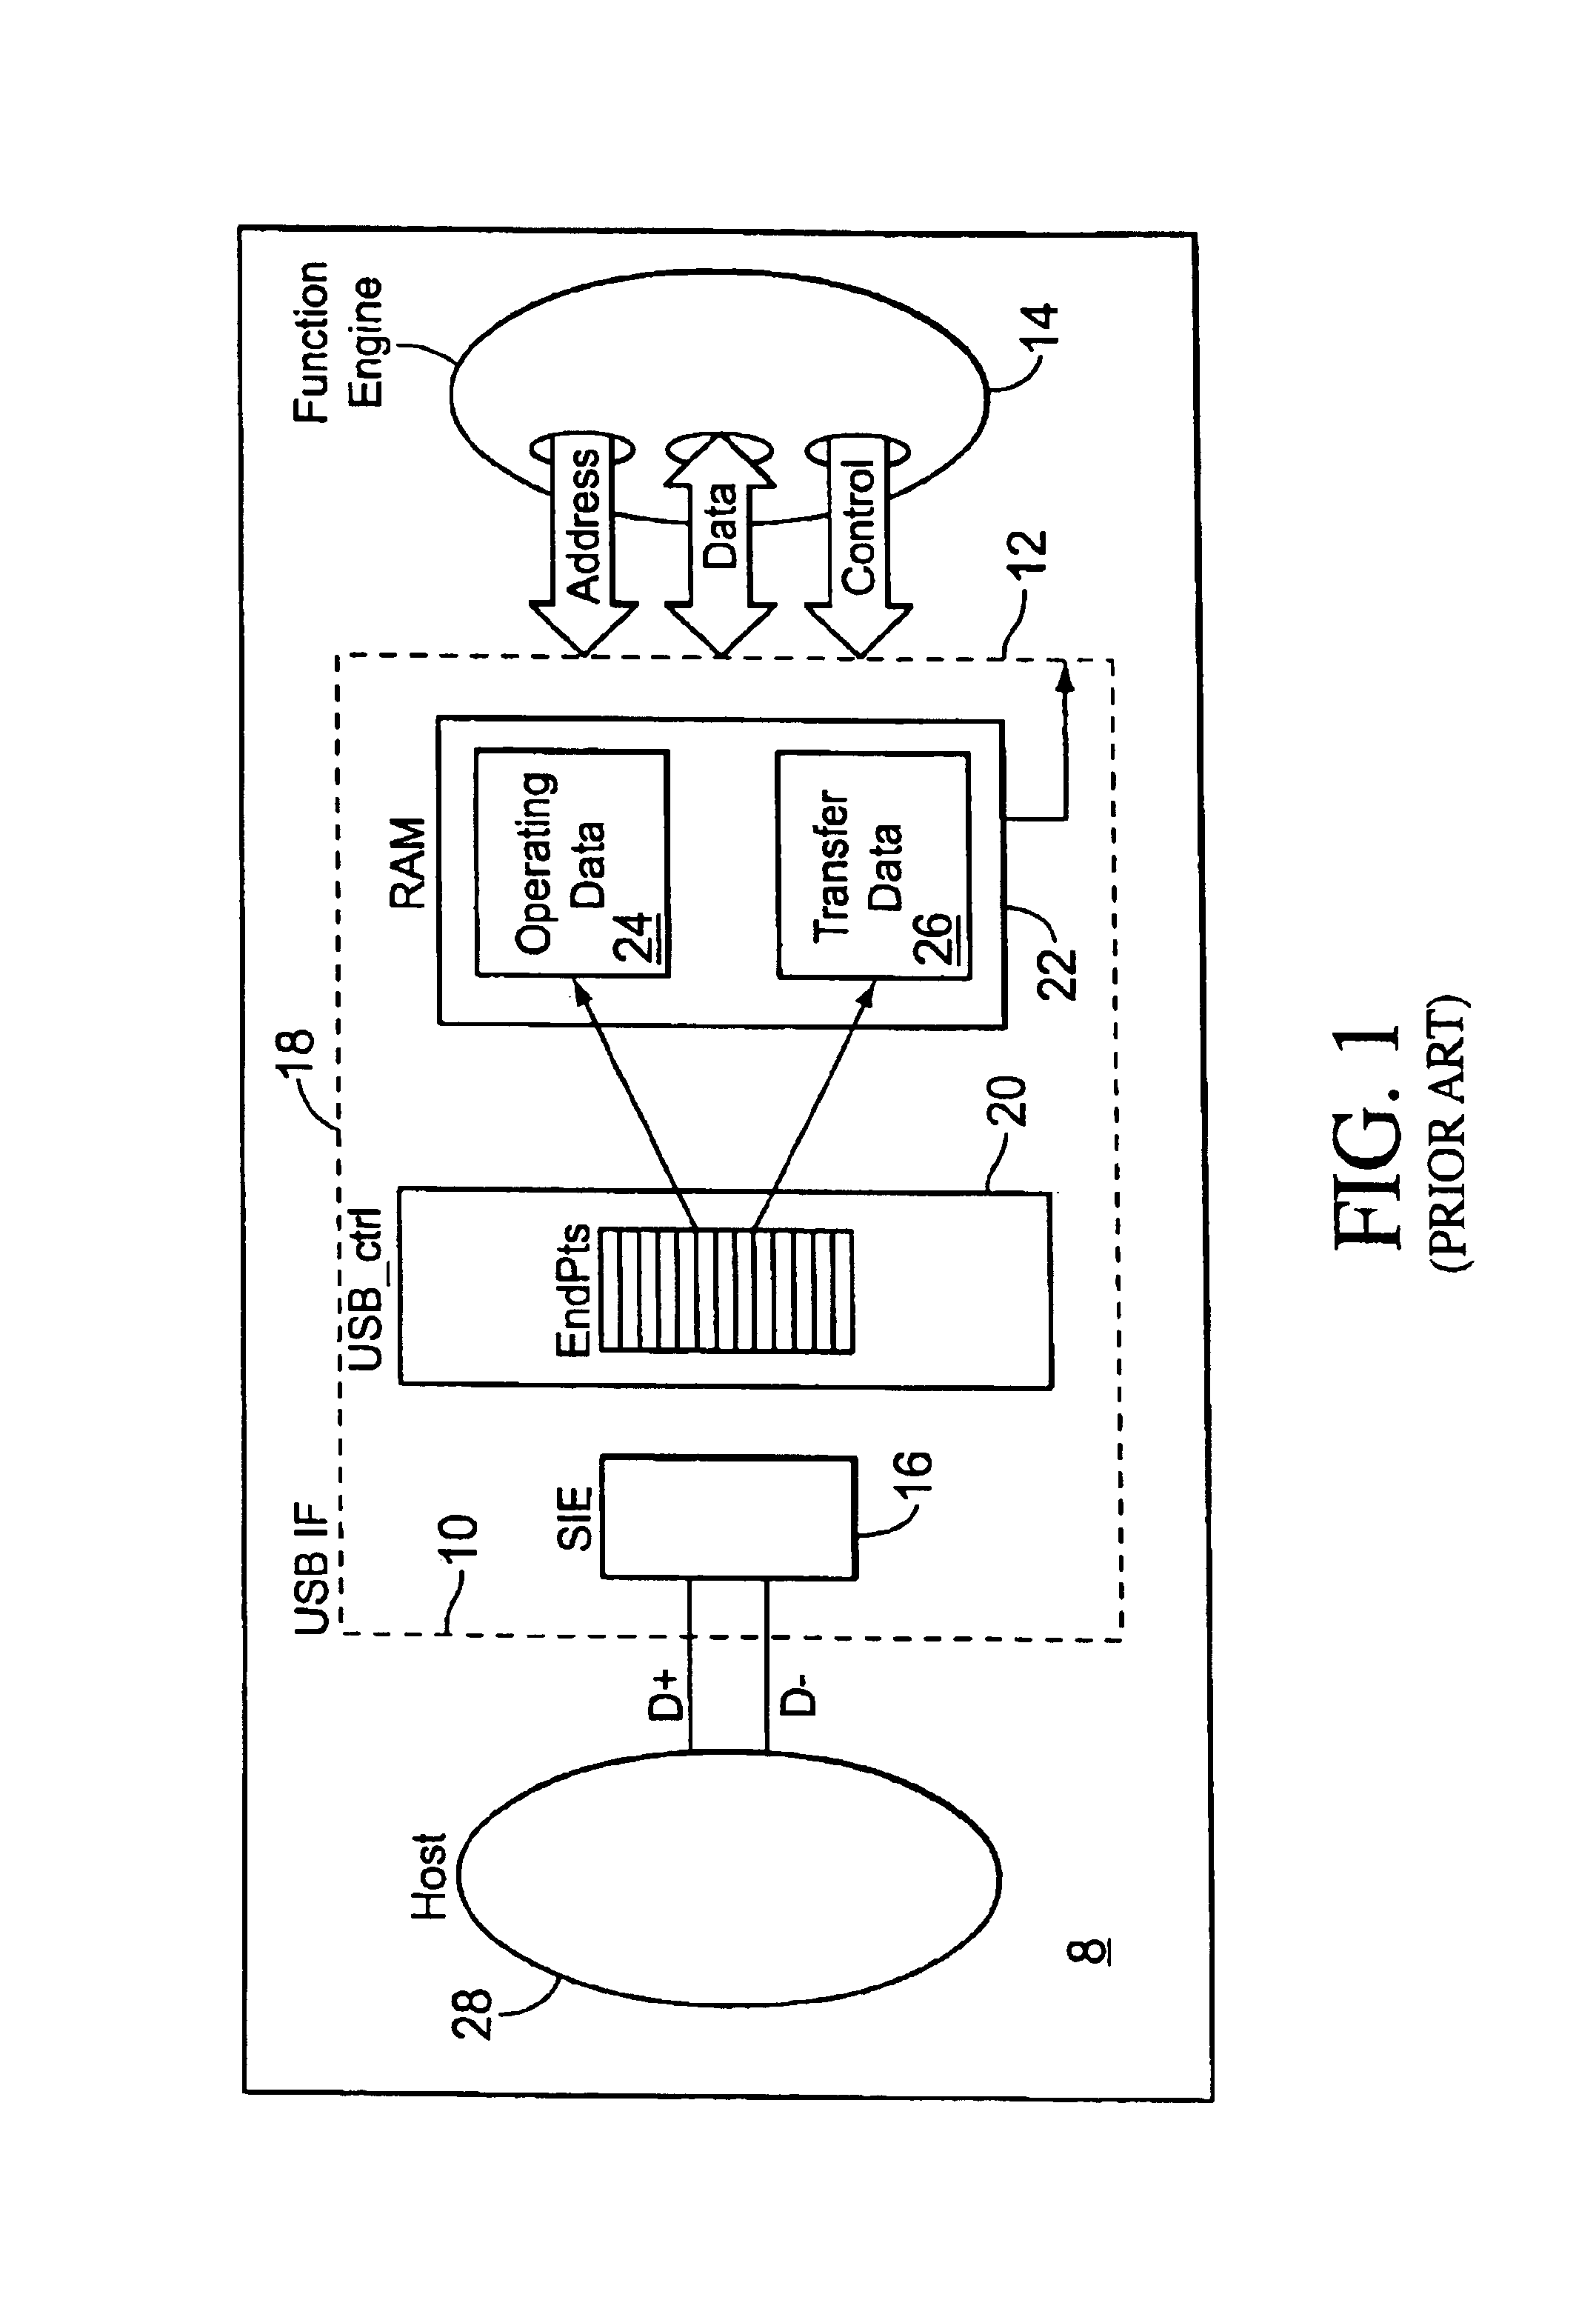 USB device controller